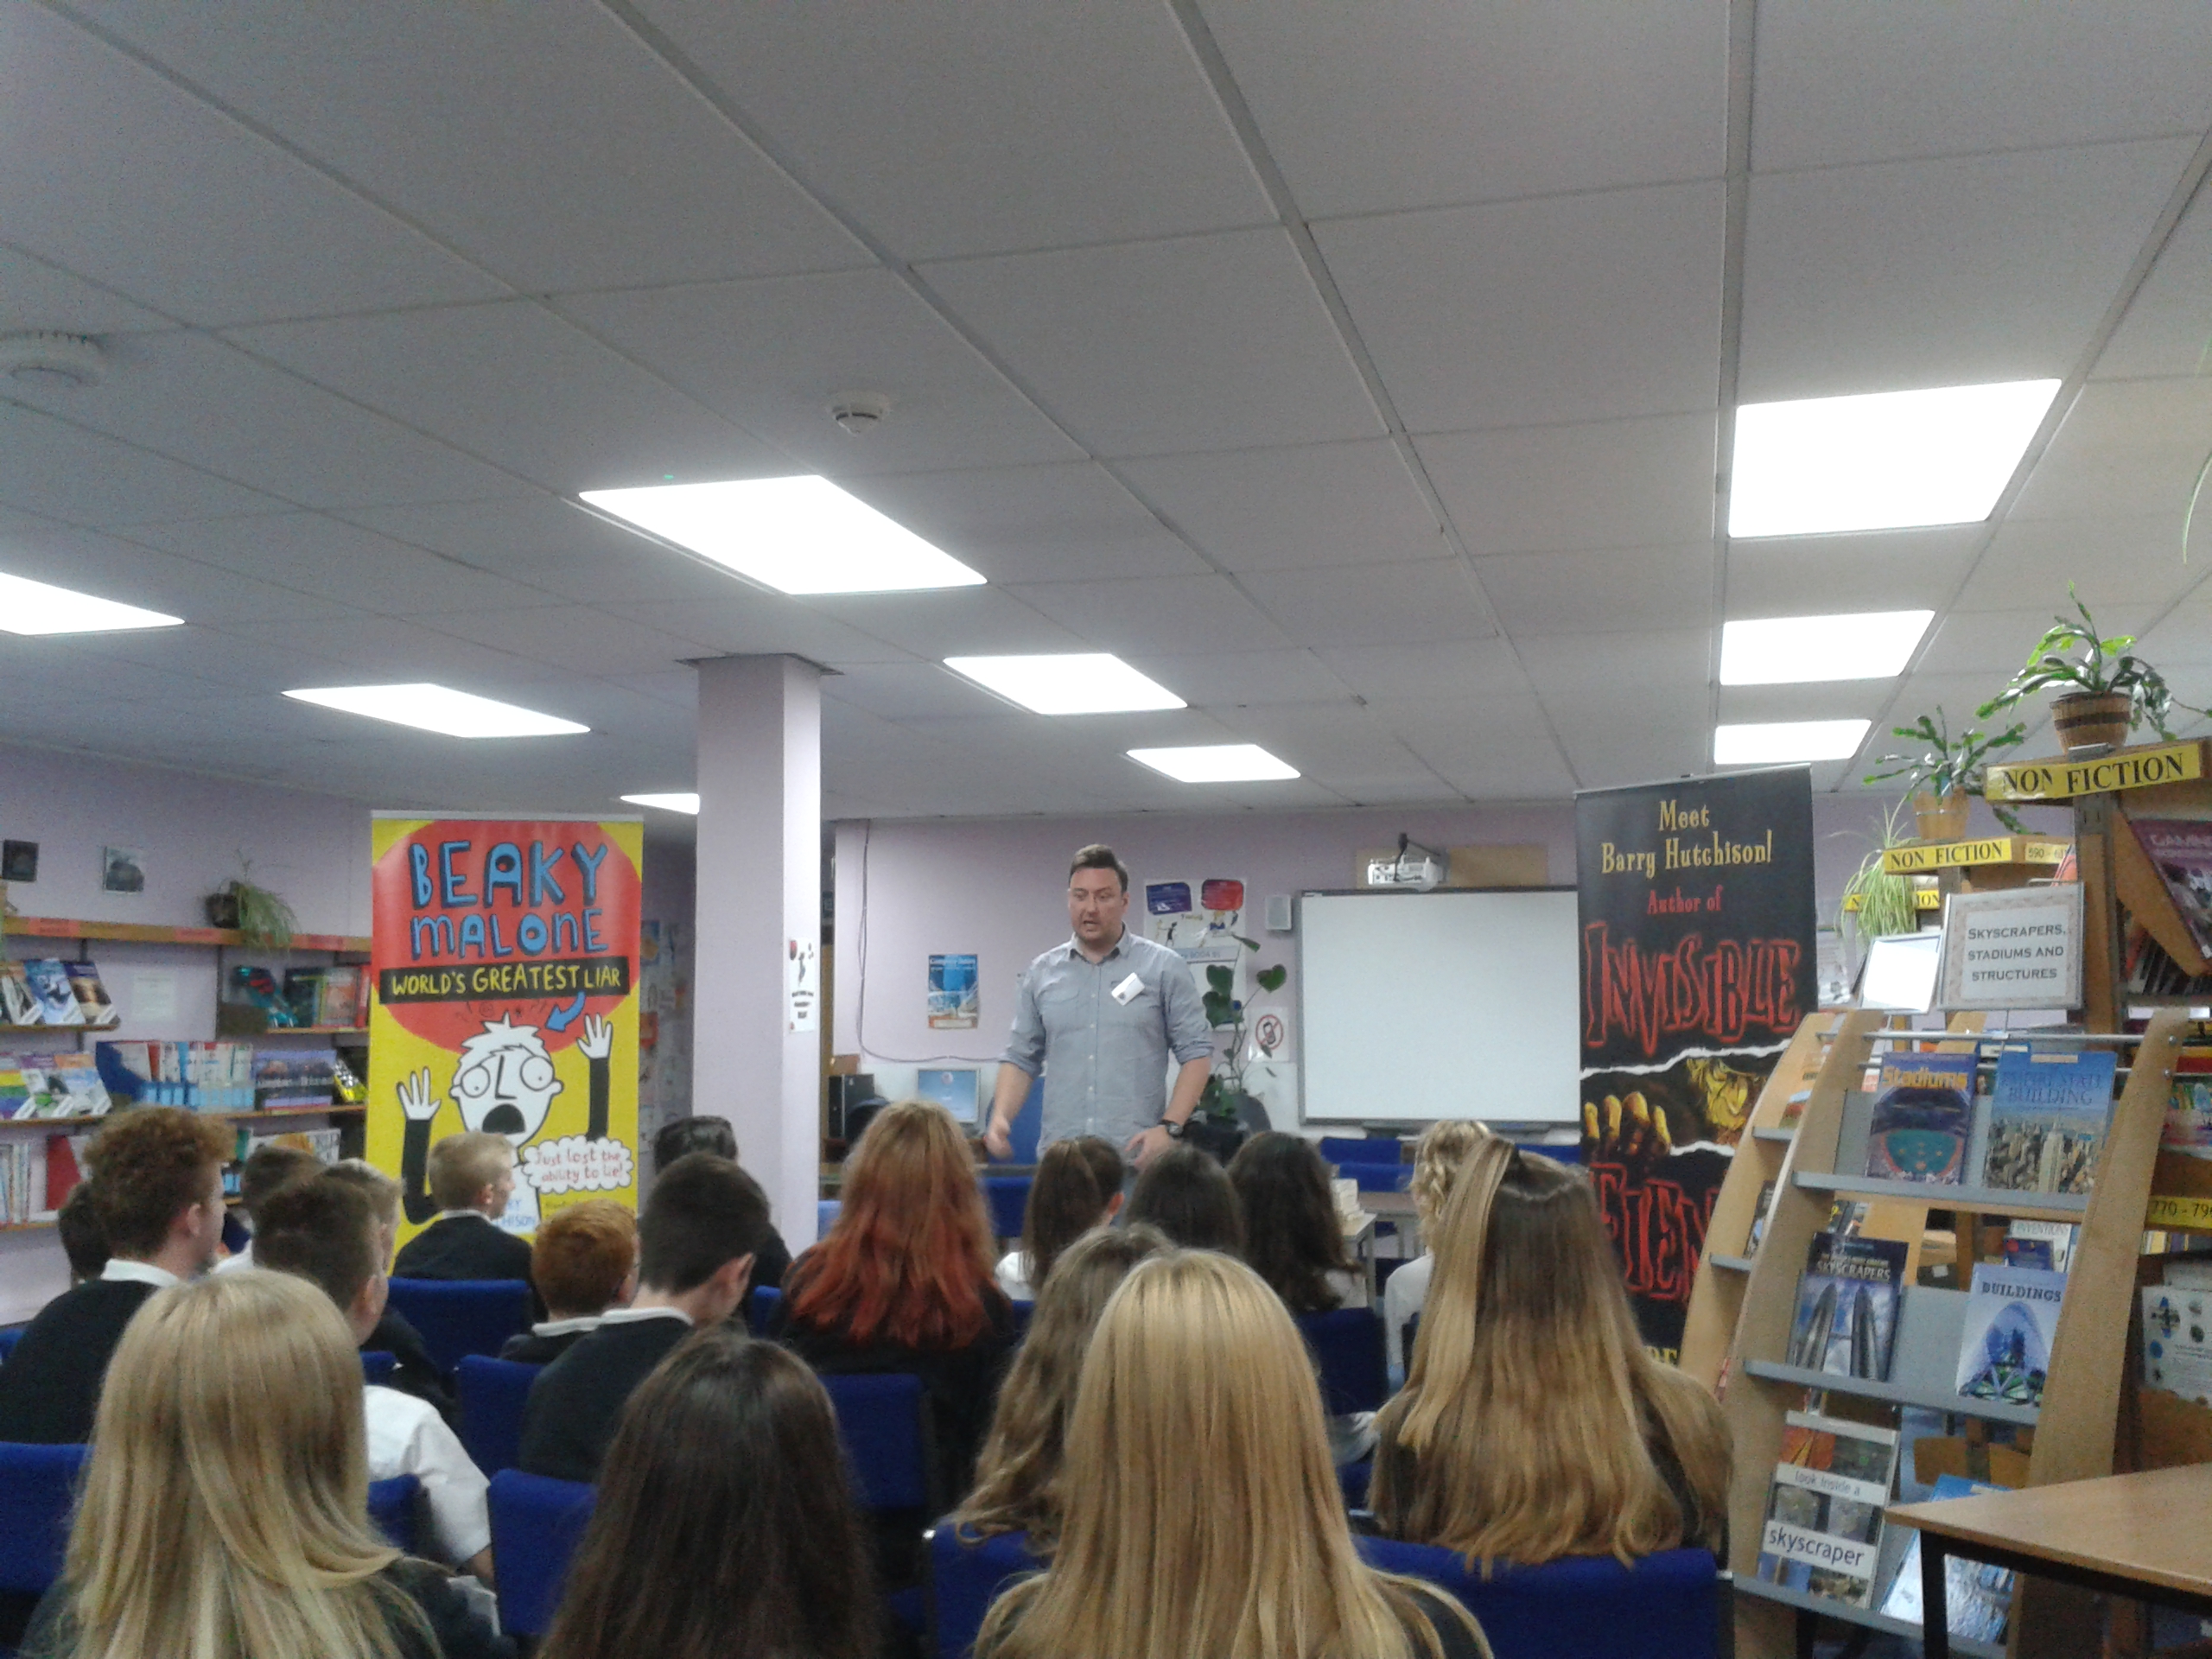 Successful visit from author Barry Hutchison